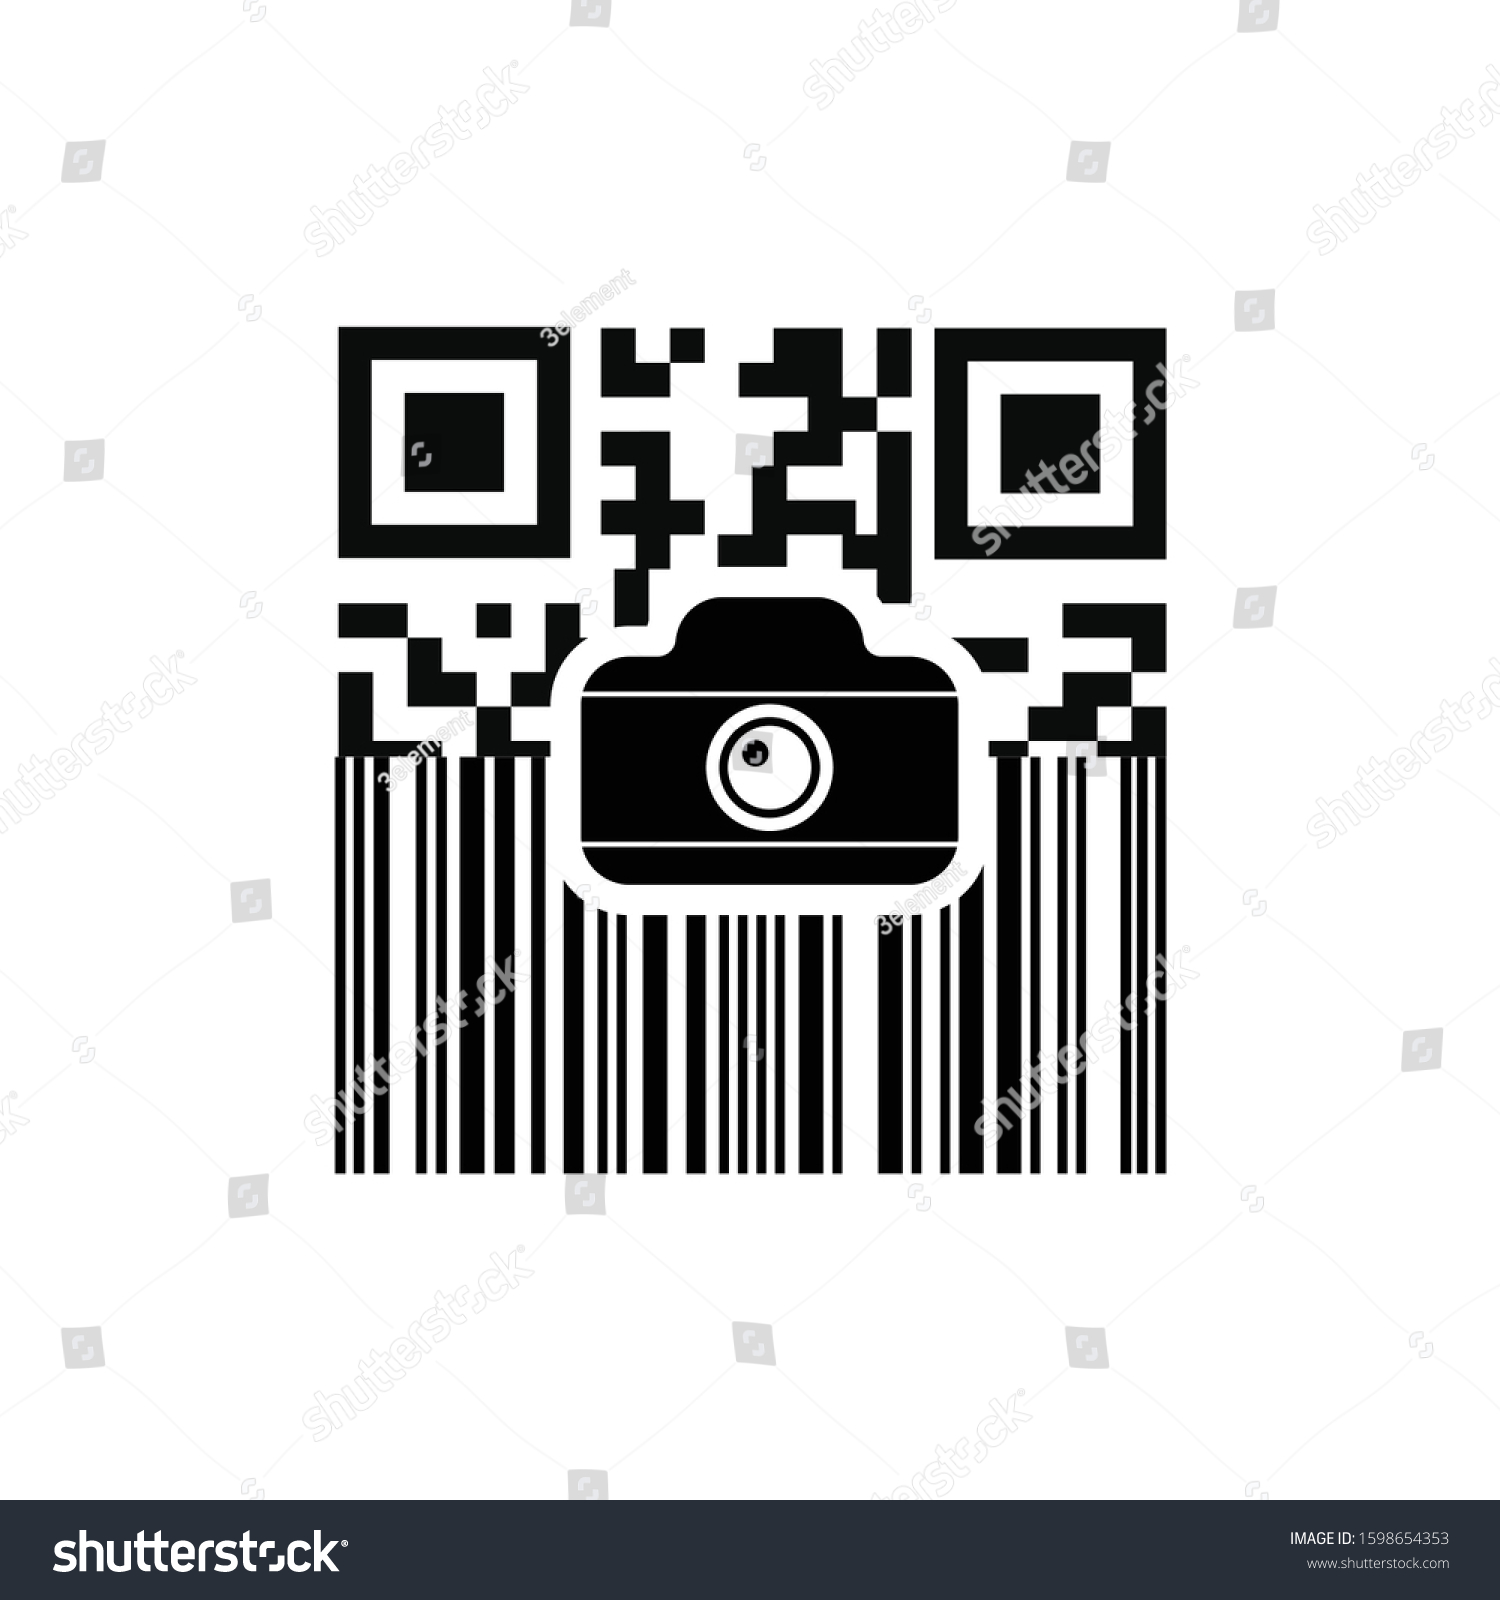 Vector Illustration Of Qr Code Barcode With Royalty Free Stock Vector 1598654353 4497